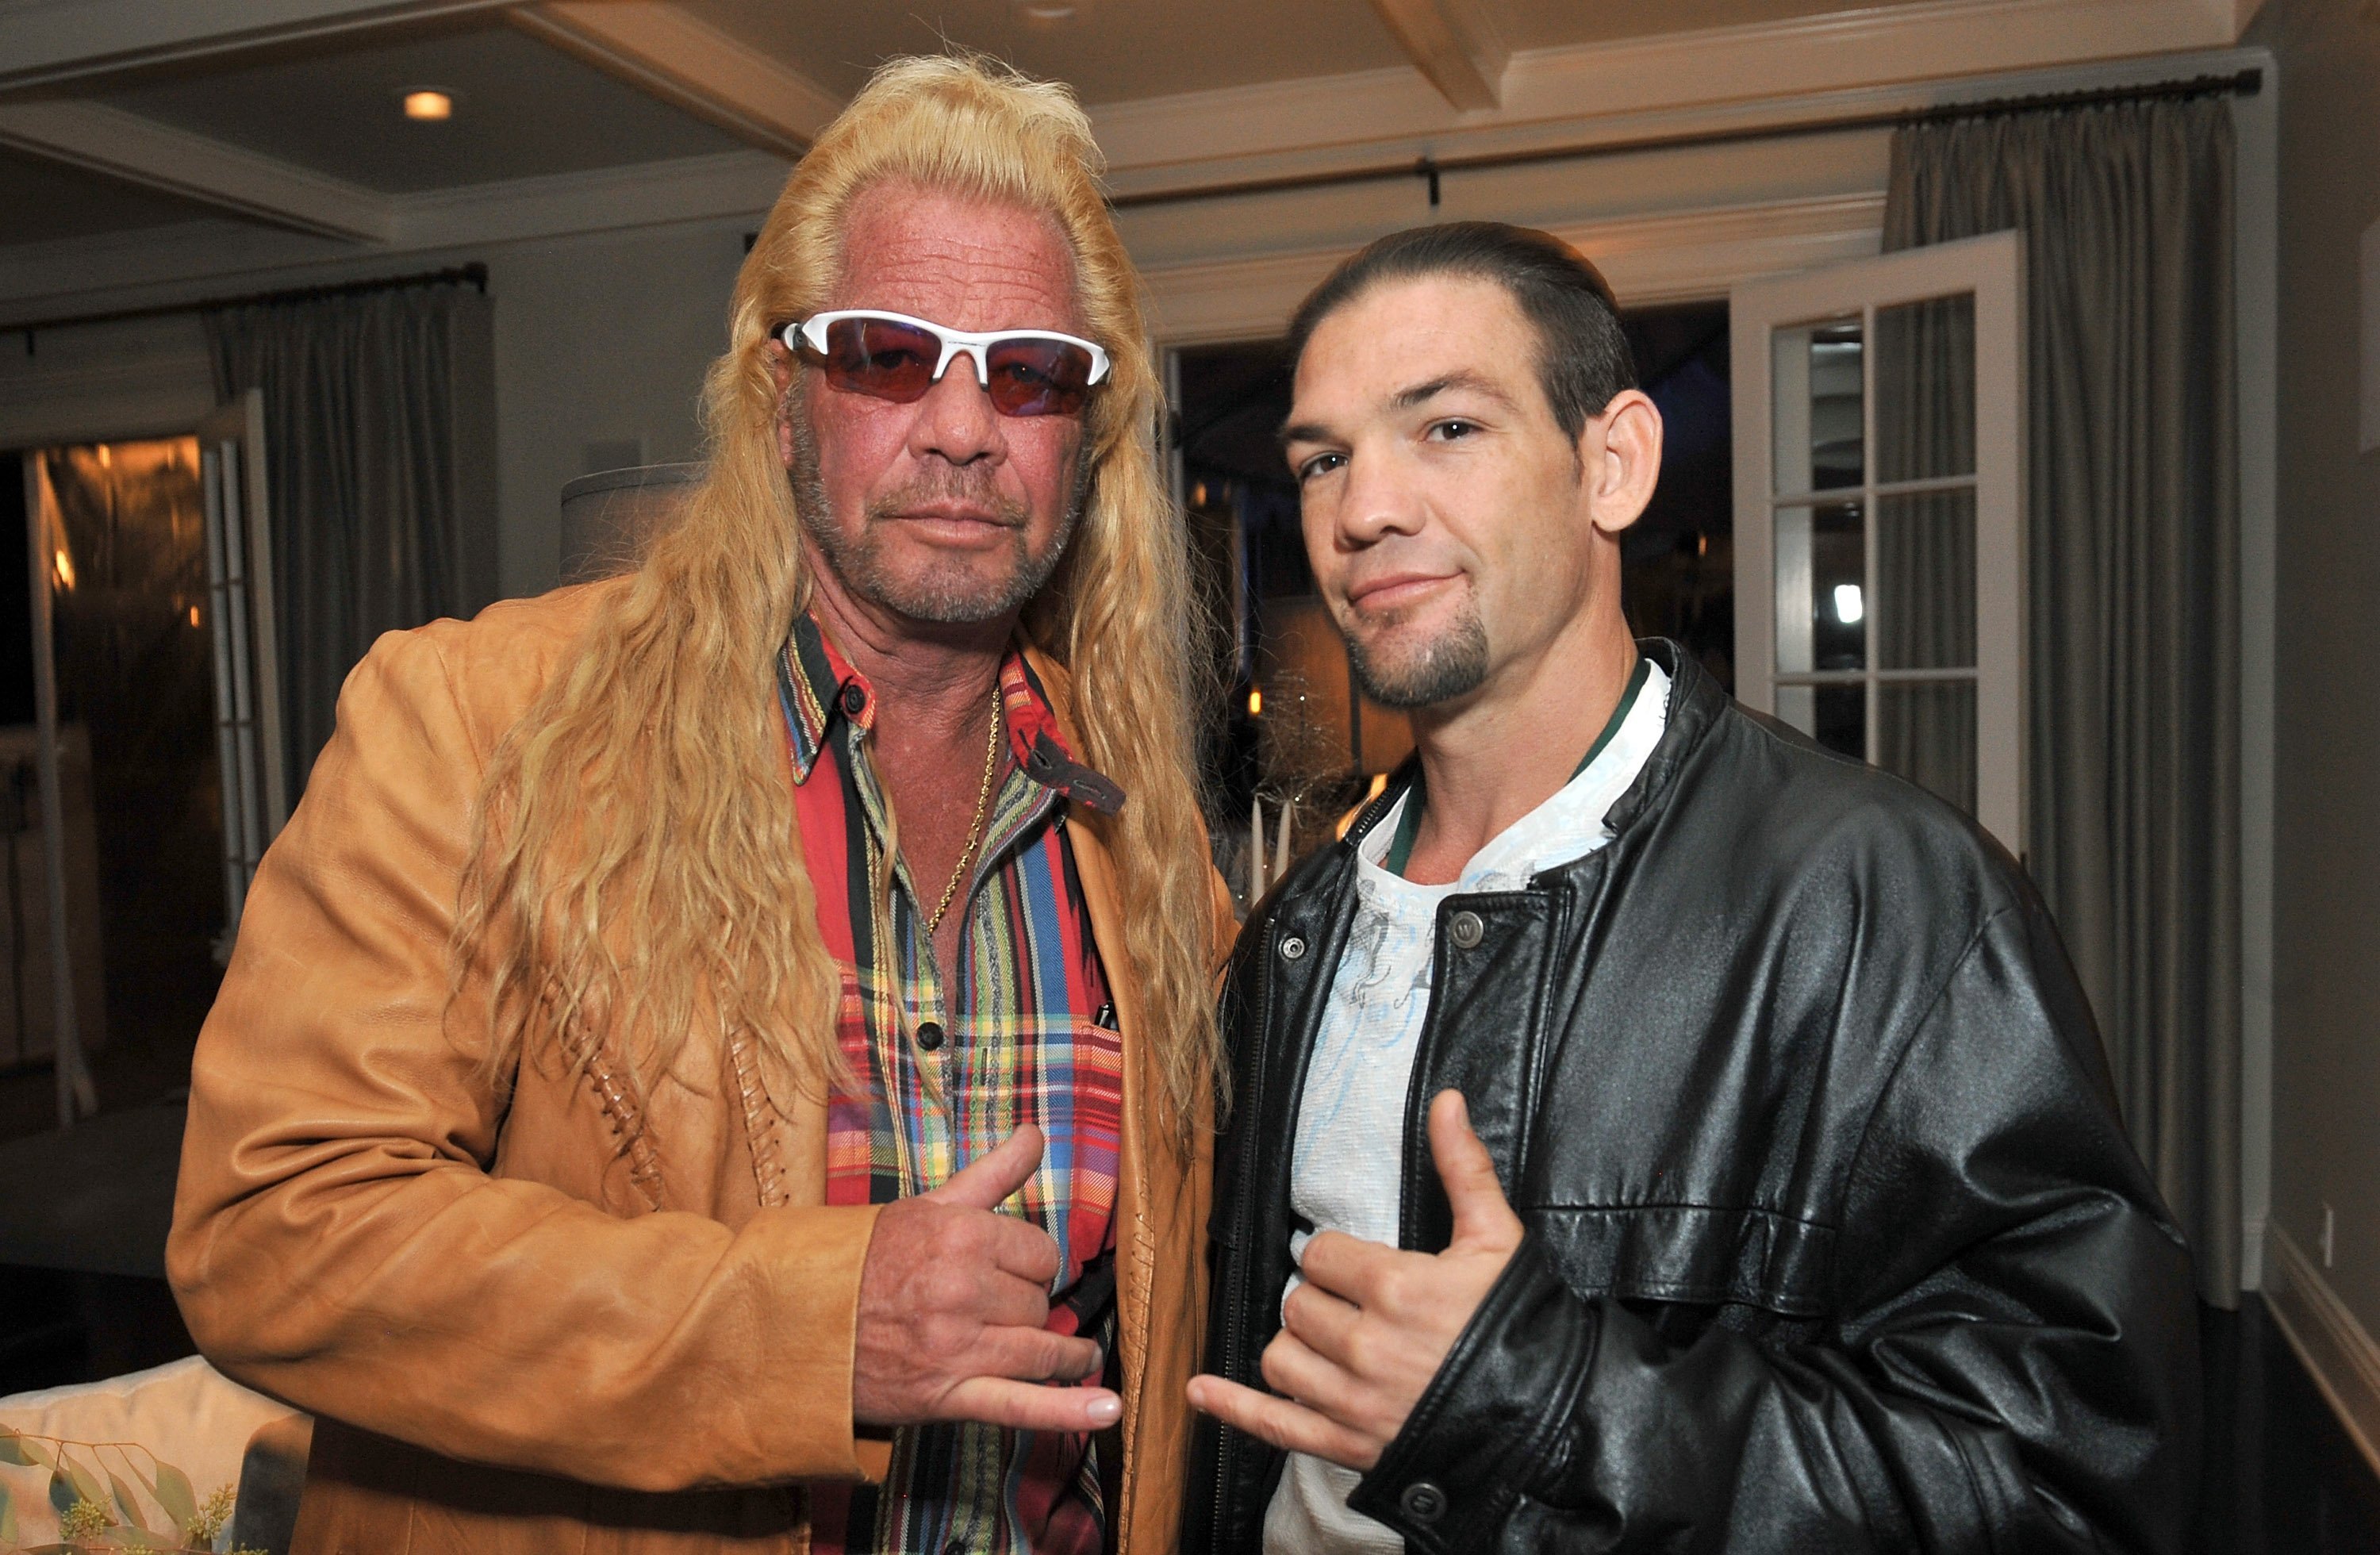 Duane Chapman and son Leland Chapman attend the Electus & College Humor Holiday Party in Los Angeles, California on December 12, 2013 | Photo: Getty Images